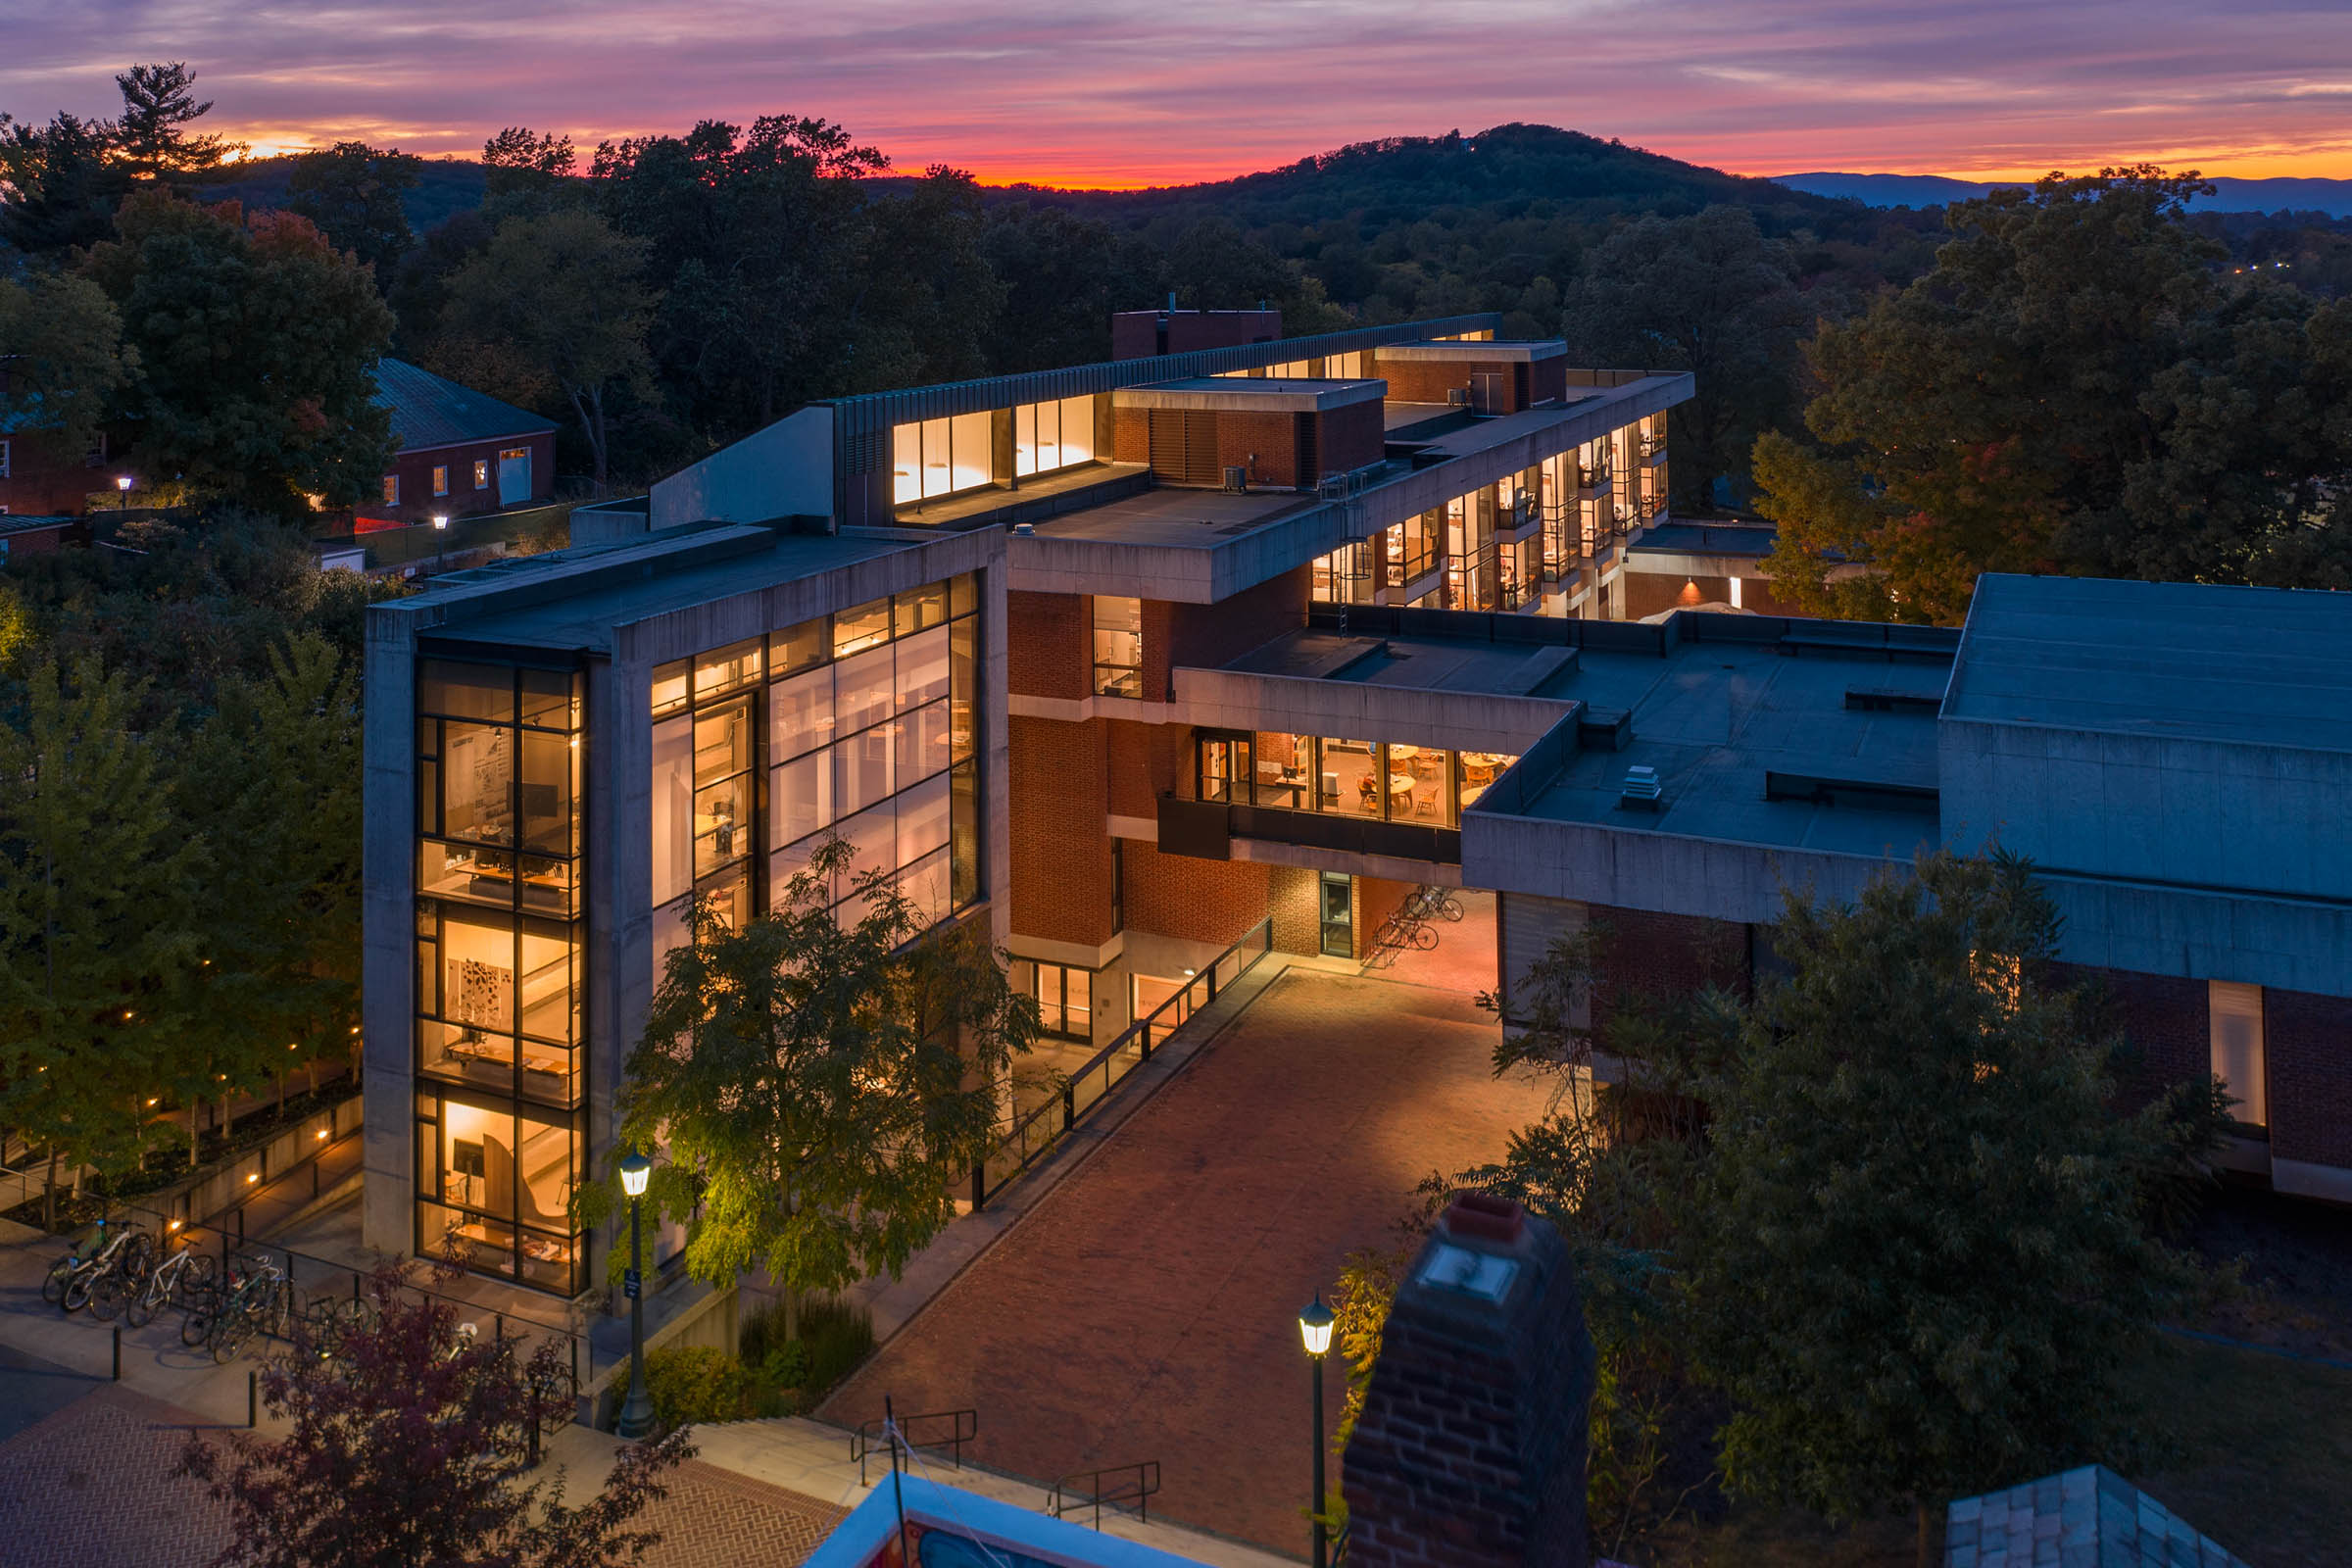 Arial view of Campbell hall lit up at night